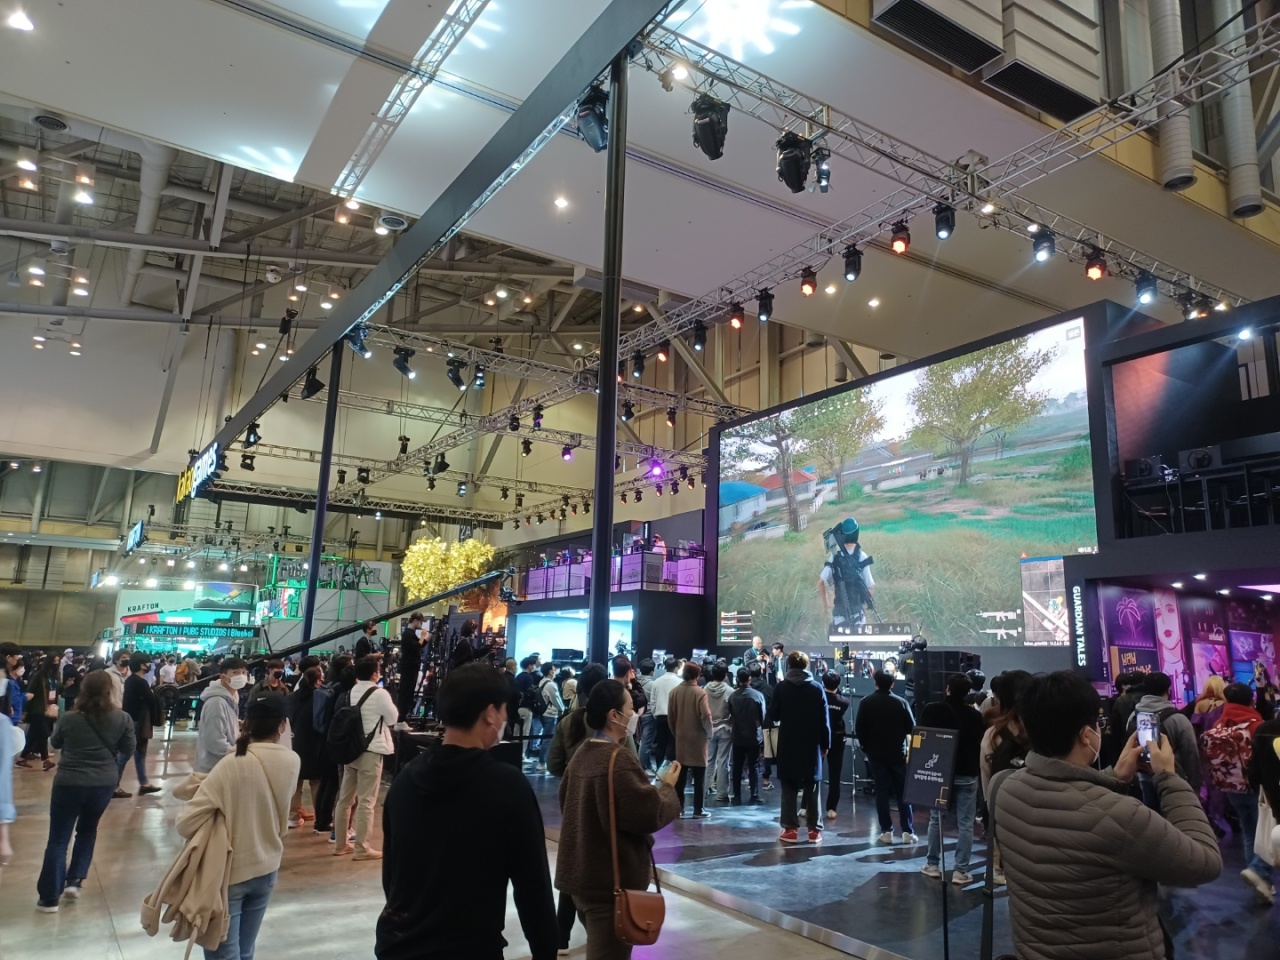 Visitors play games on a giant screen. (Lee Si-jin/The Korea Herald)